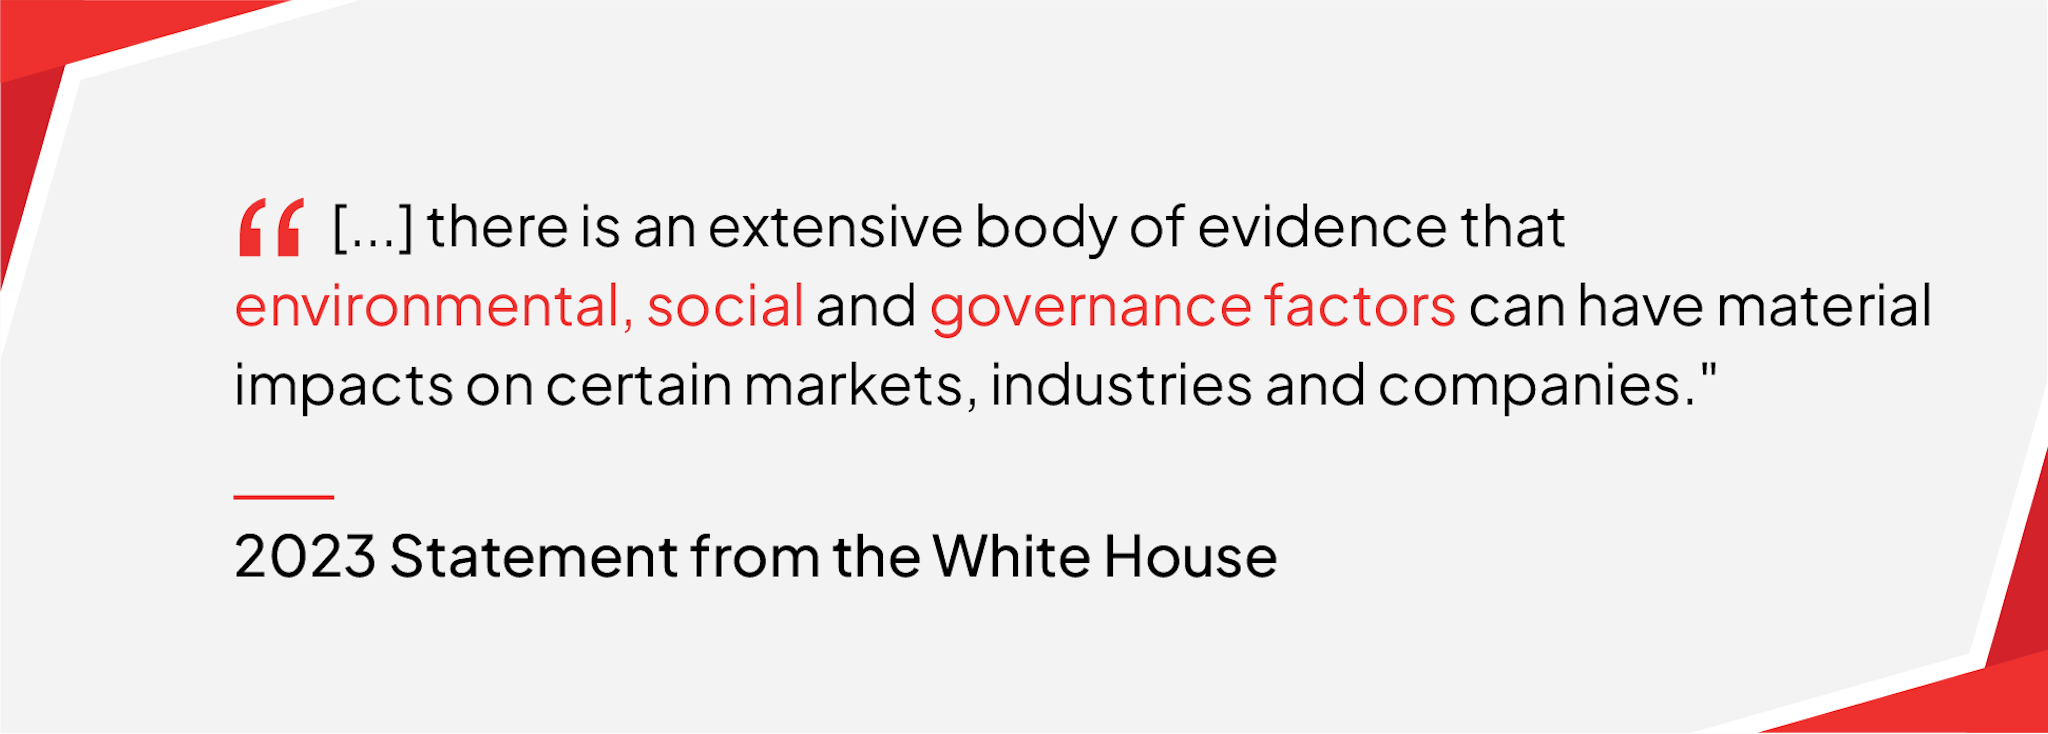 "[...] there is an extensive body of evidence that environmental, social and governance factors can have material impacts on certain markets, industries and companies." — 2023 Statement from the White House